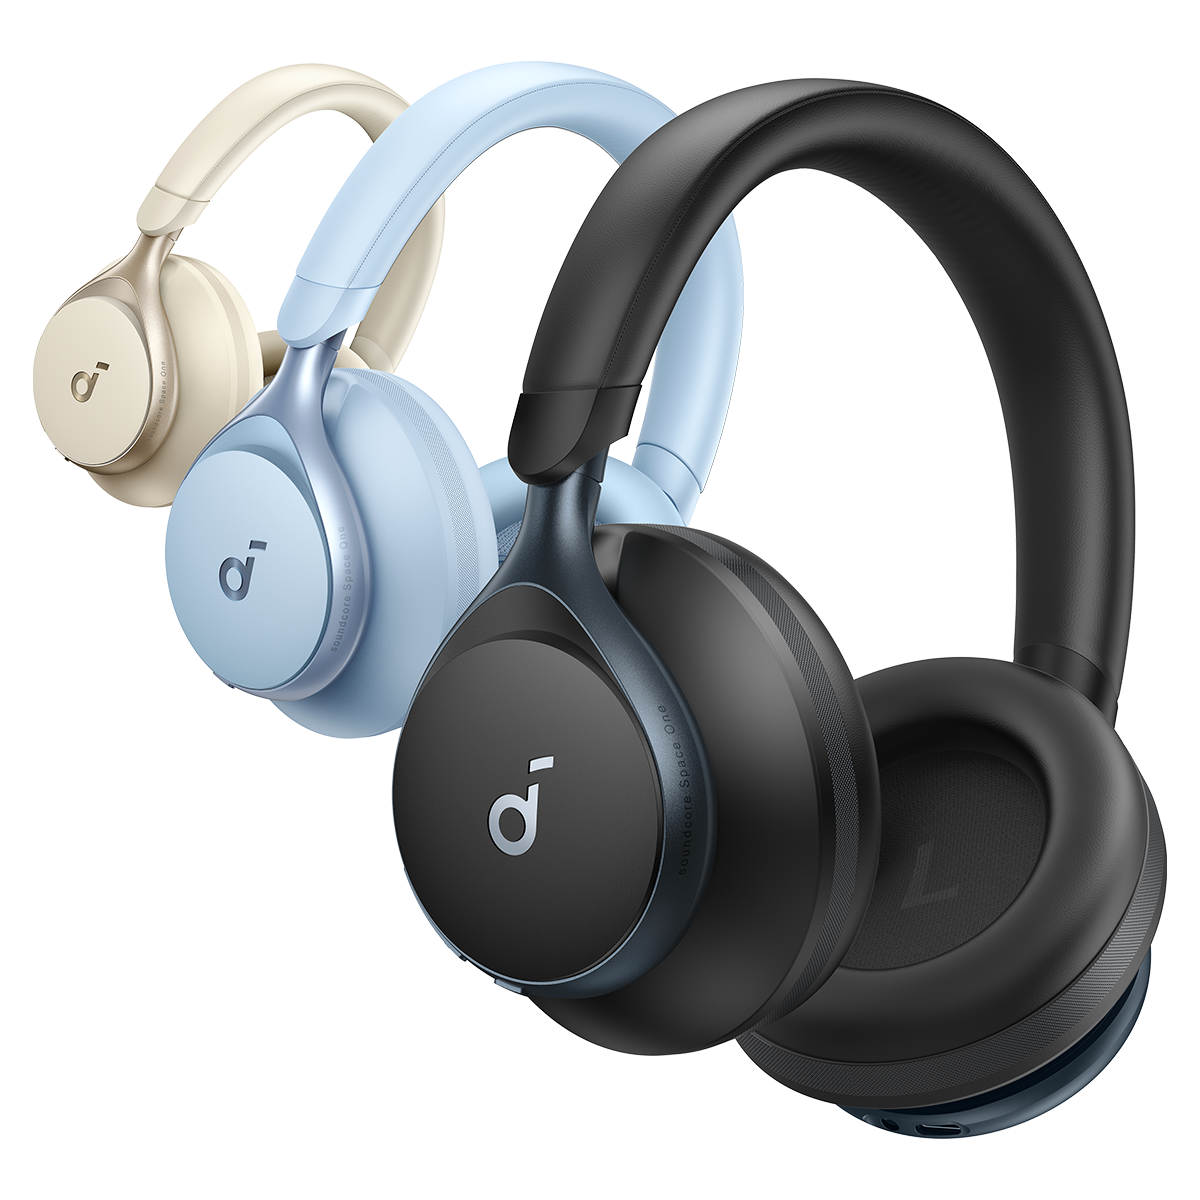 Soundcore Space One headphones in three different colors: Jet Black, Latte Cream, and Sky Blue